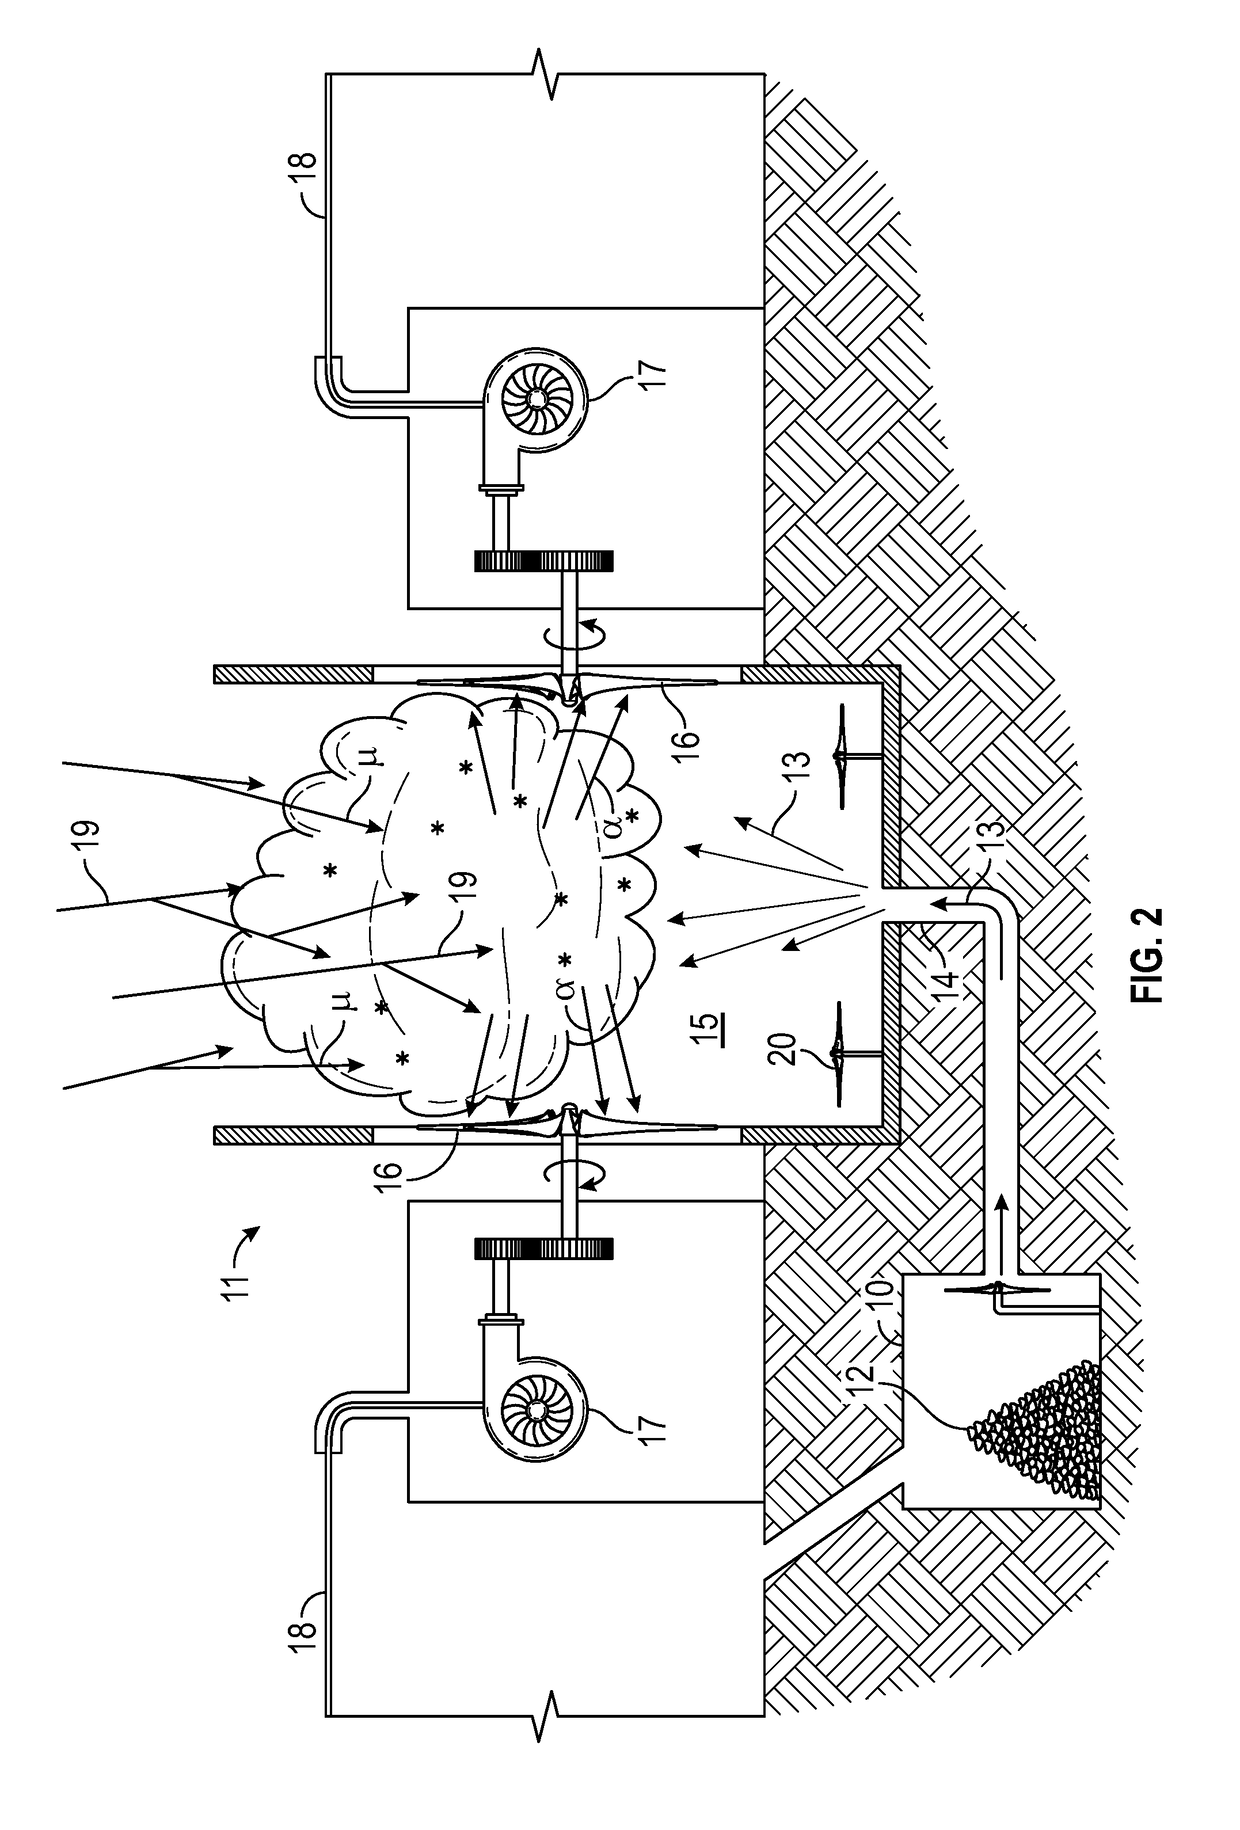 Muon-catalyzed controlled fusion electricity-generating apparatus and method